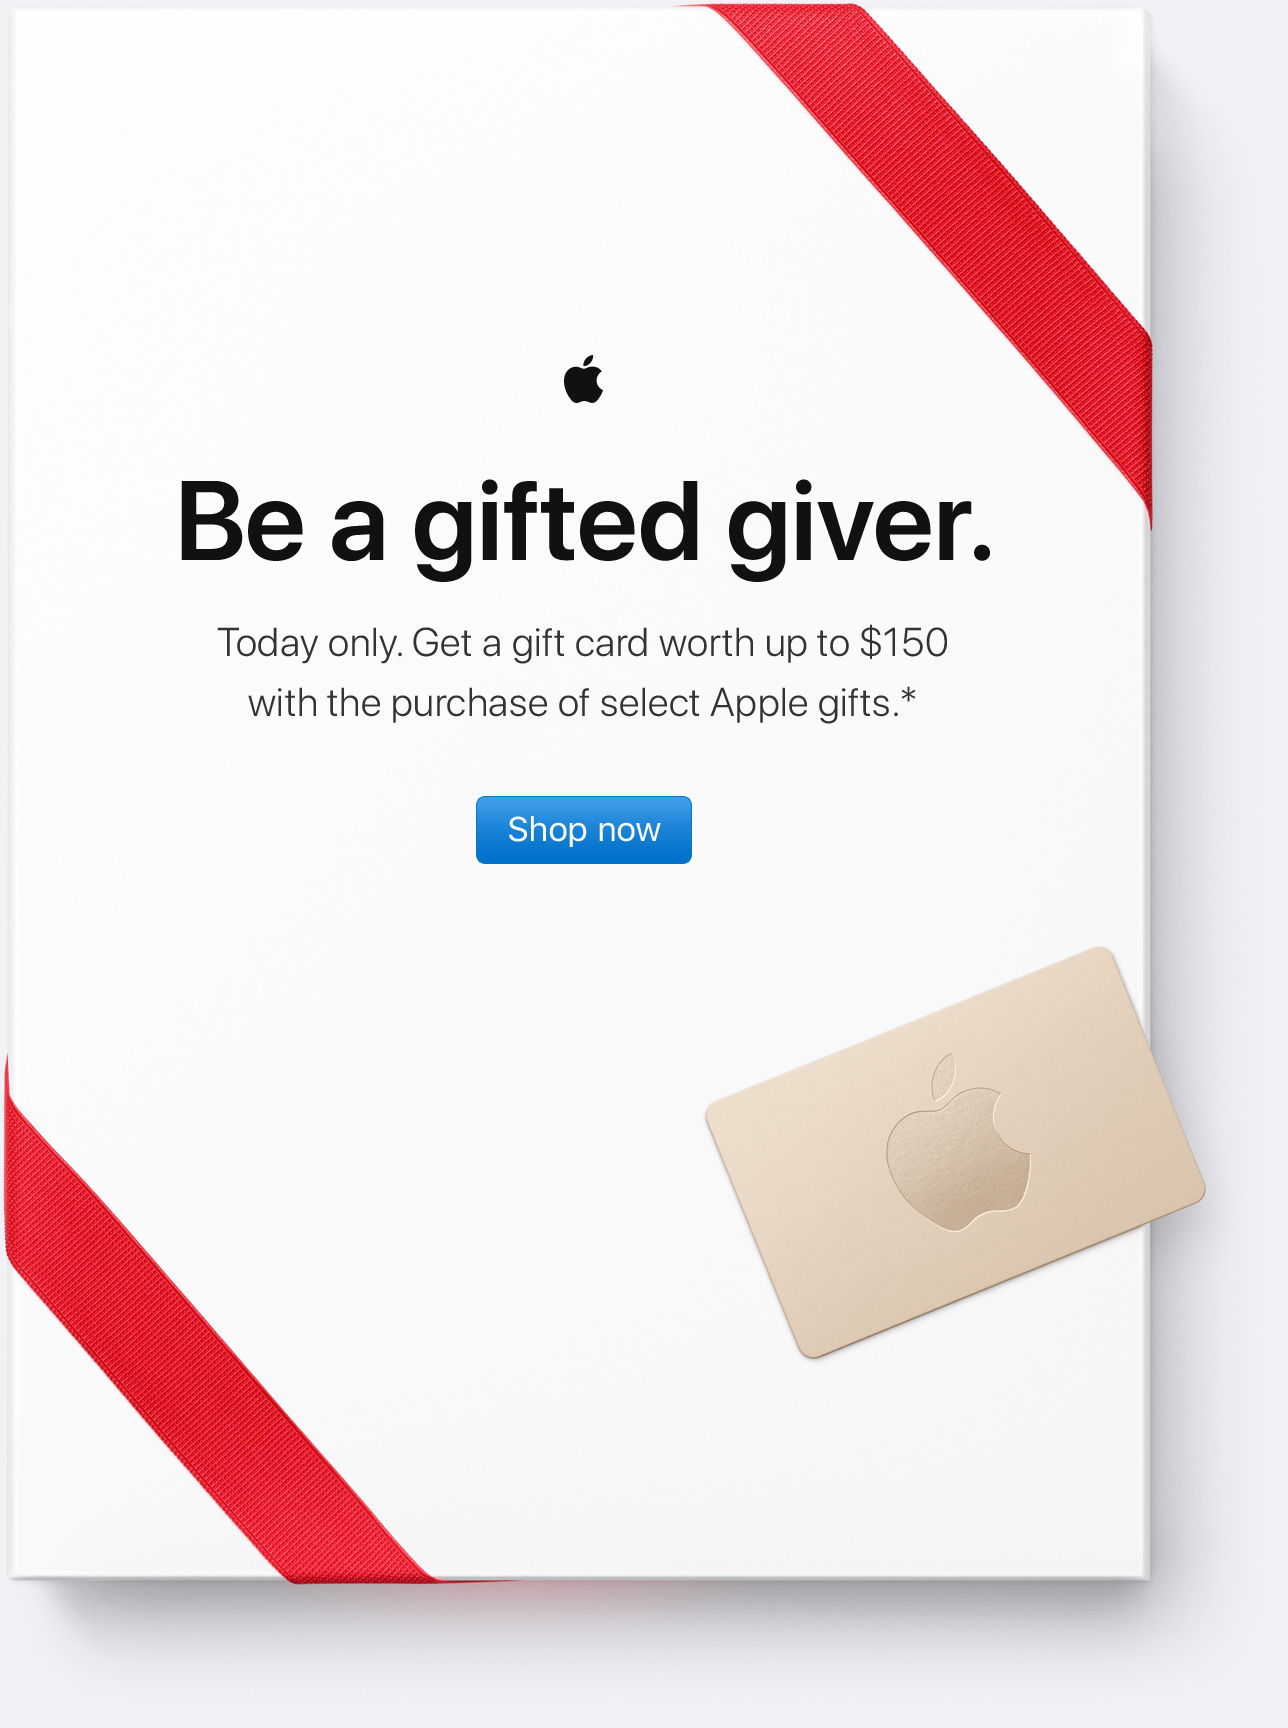 Be a gifted giver. Today only. Get a gift card worth up to $150 with the purchase of select Apple gifts.* Shop now